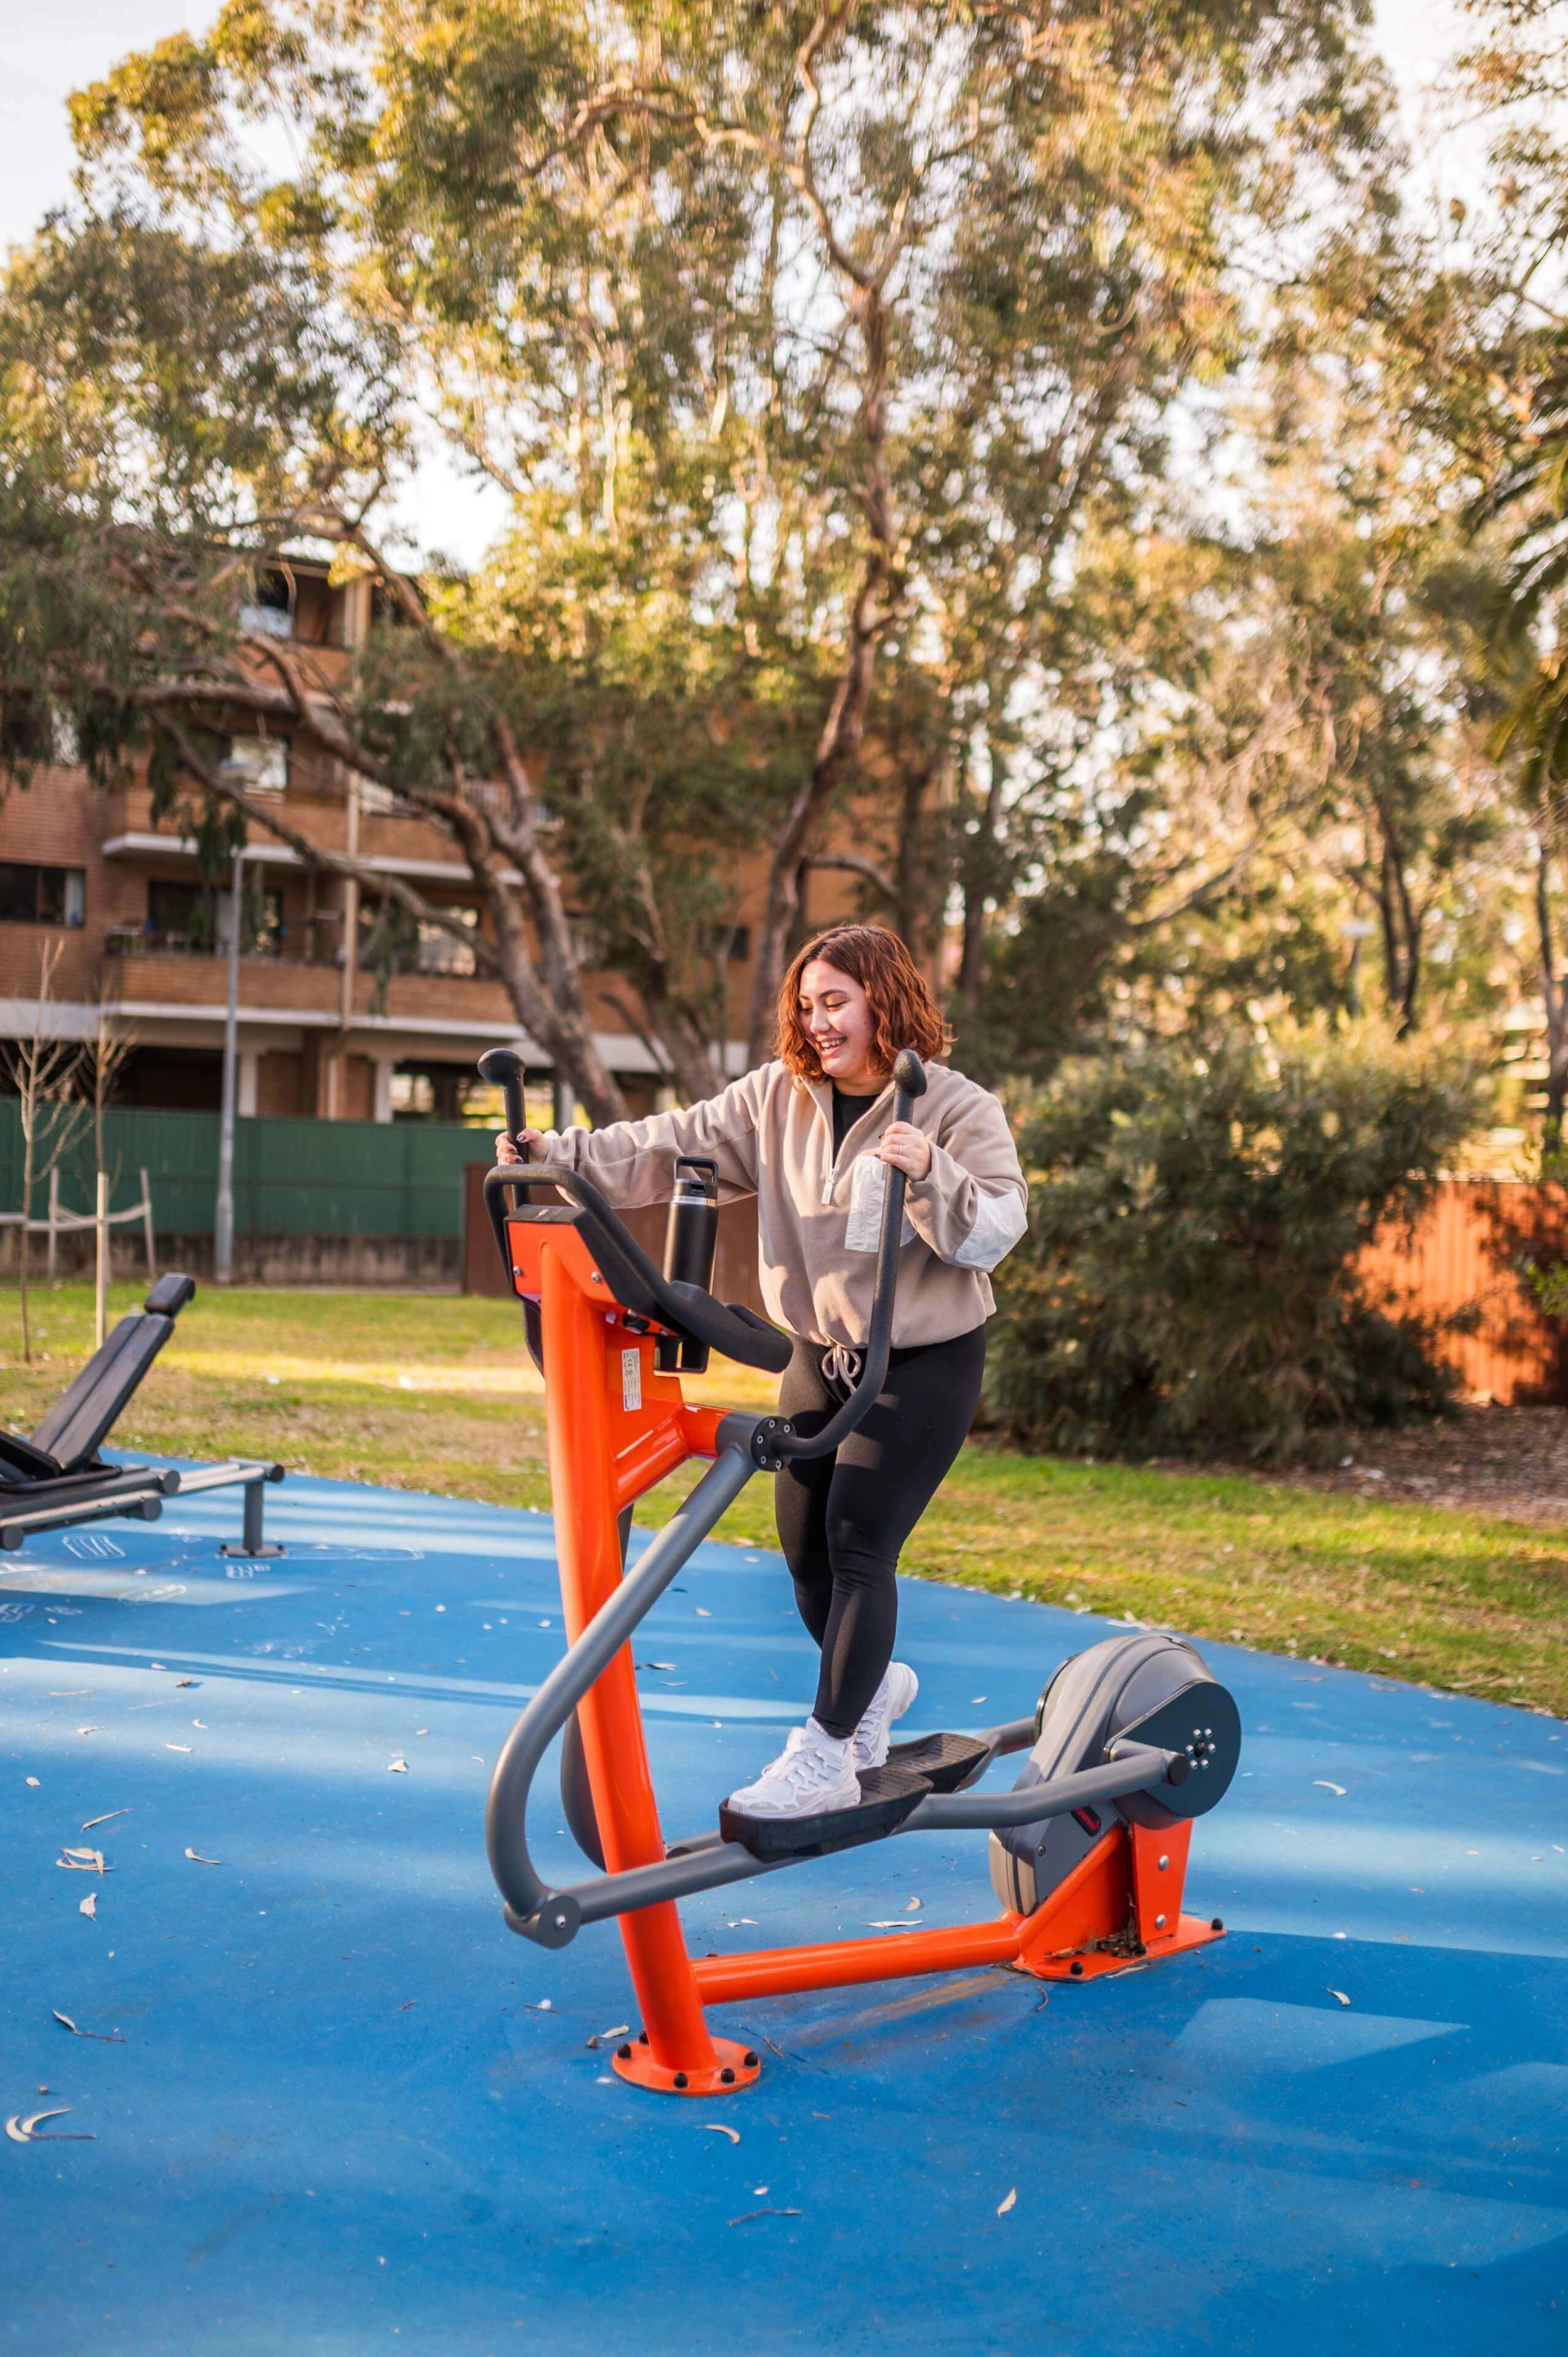 women working out on outdoor fitness equipment in Spain